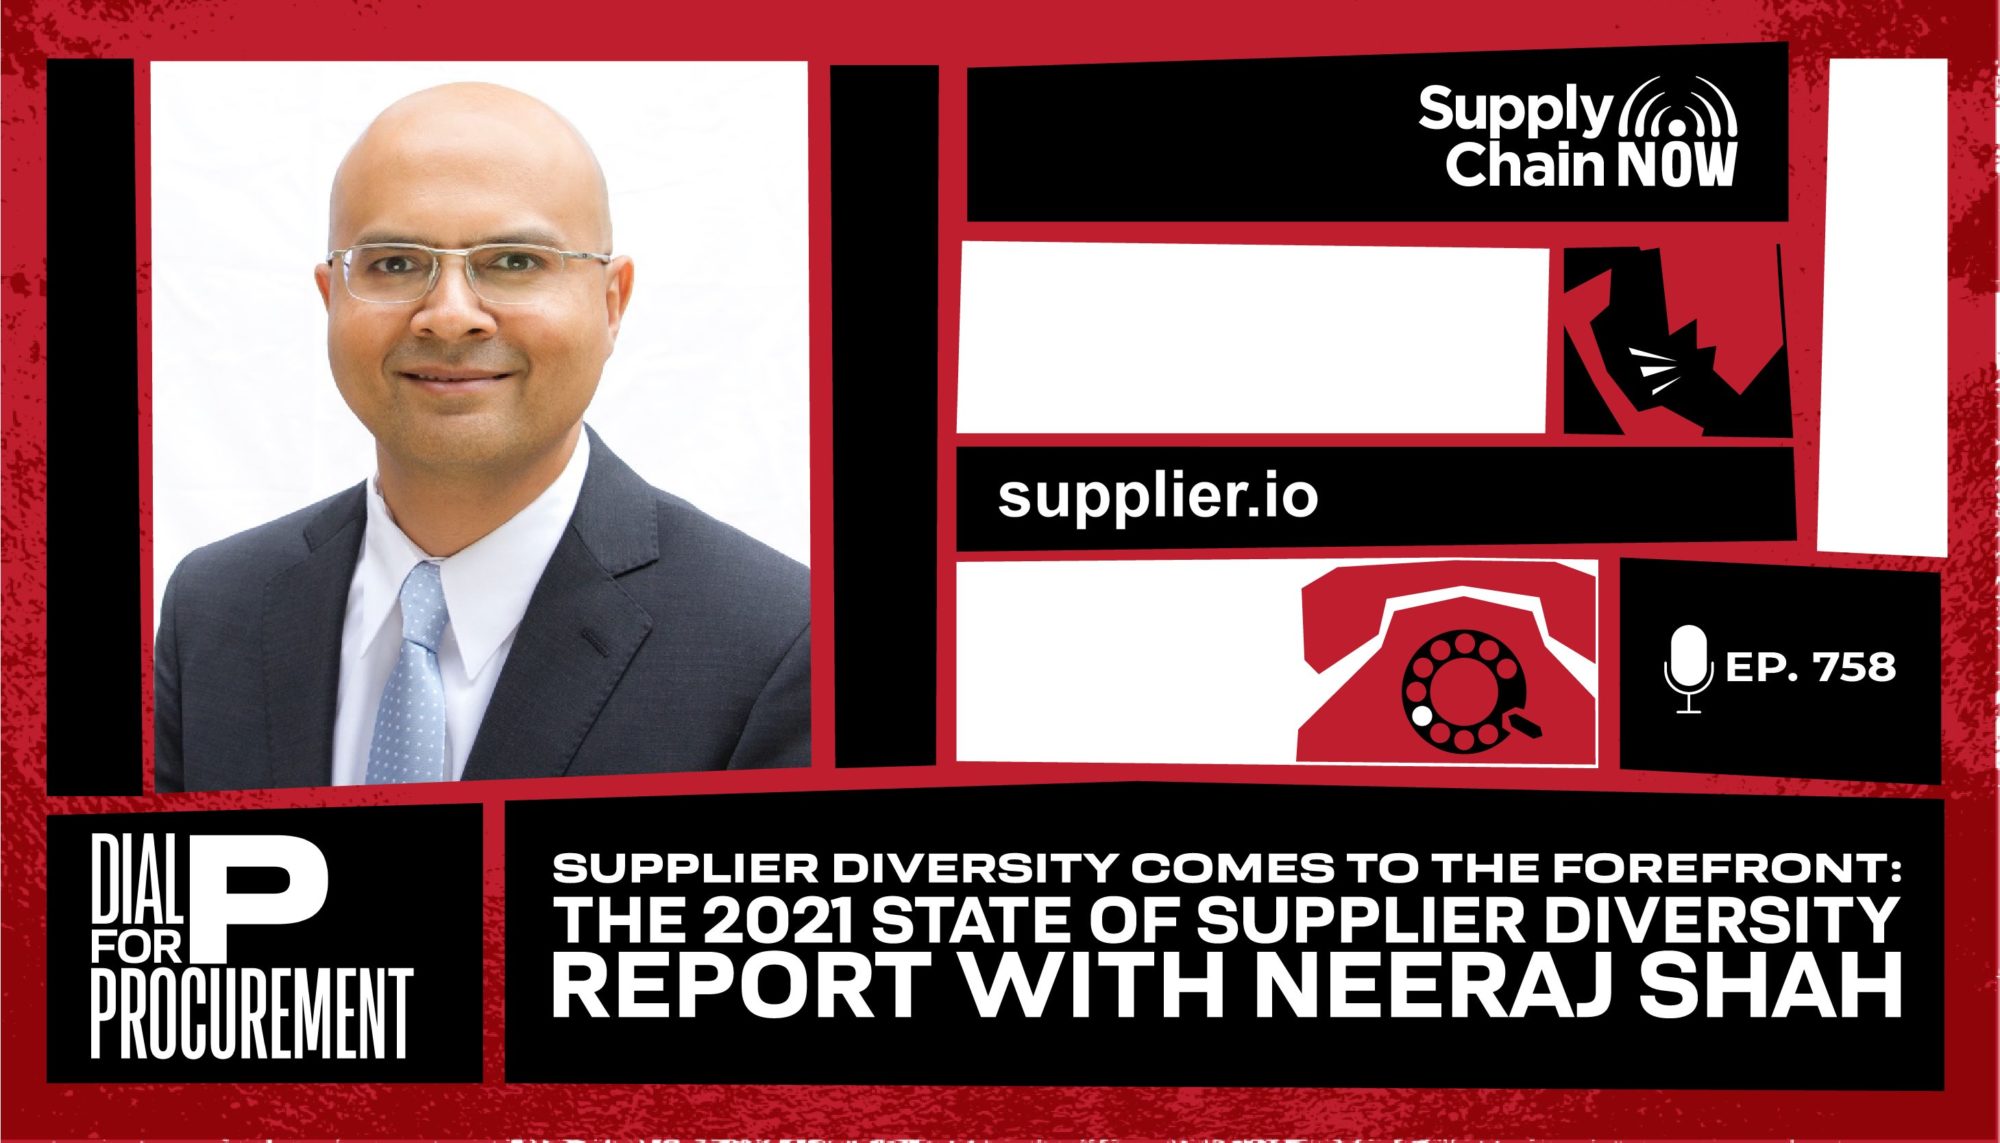 Supplier Diversity Comes to the Forefront w Neeraj Shah